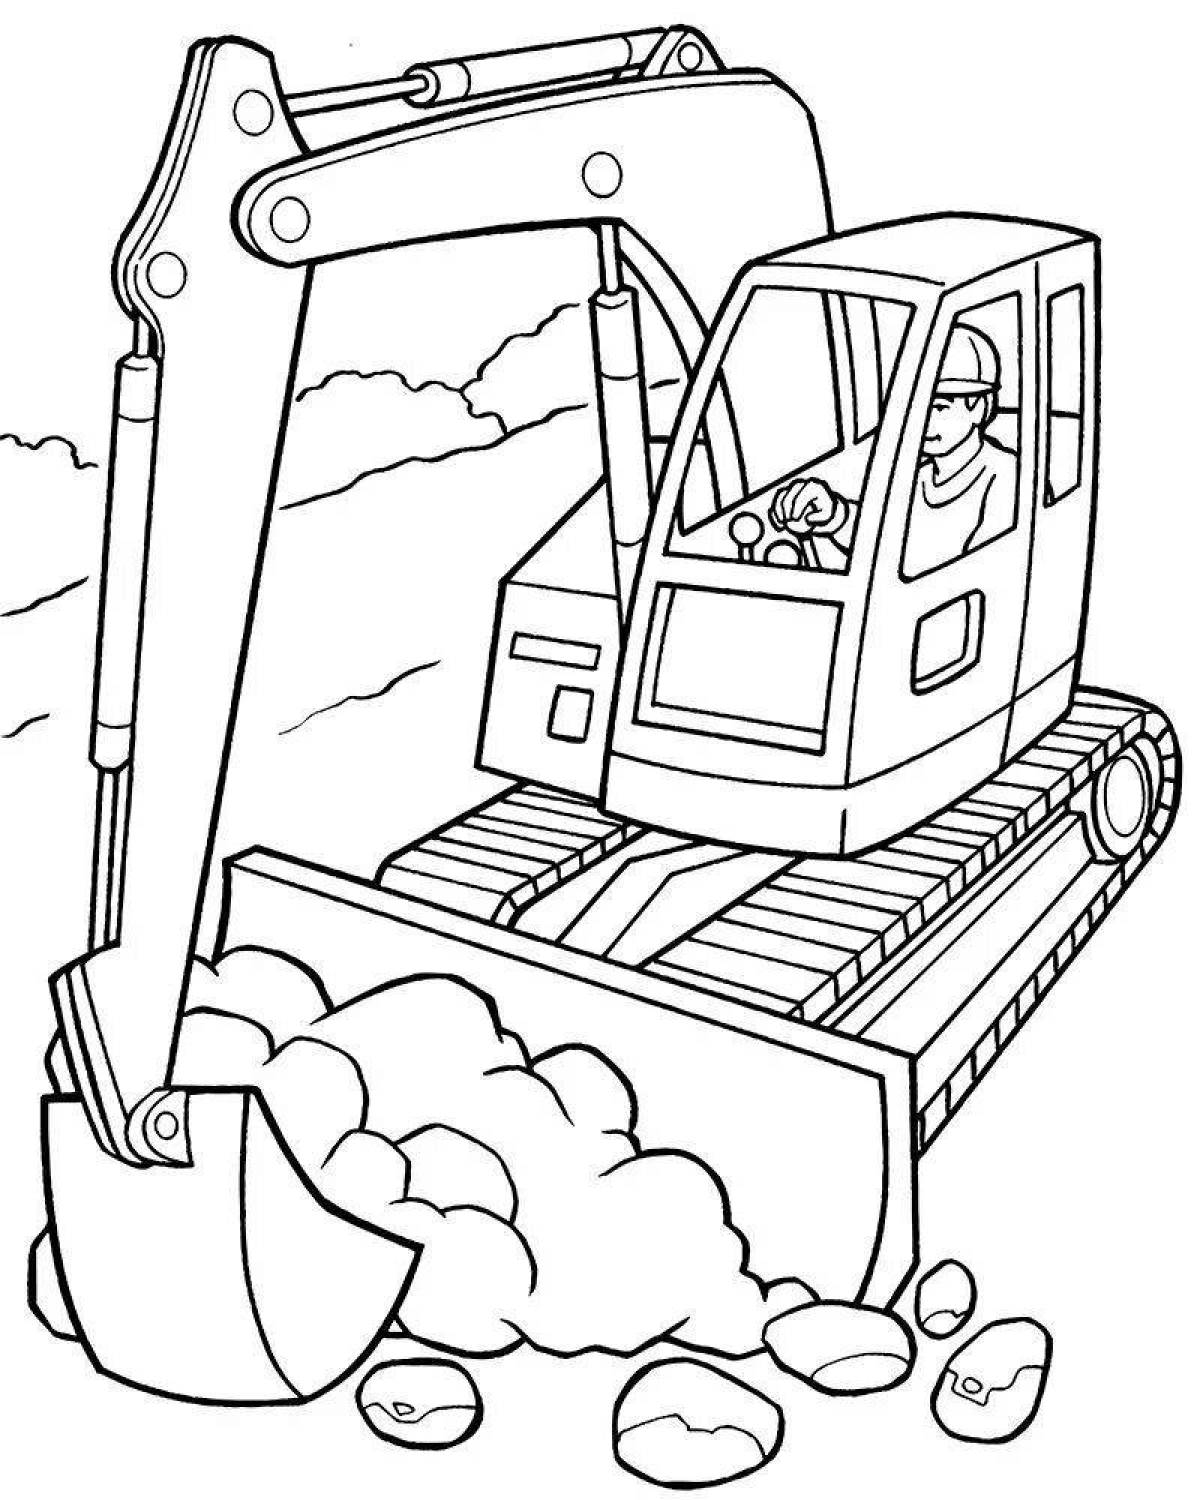 Fun excavator coloring book for 5-6 year olds